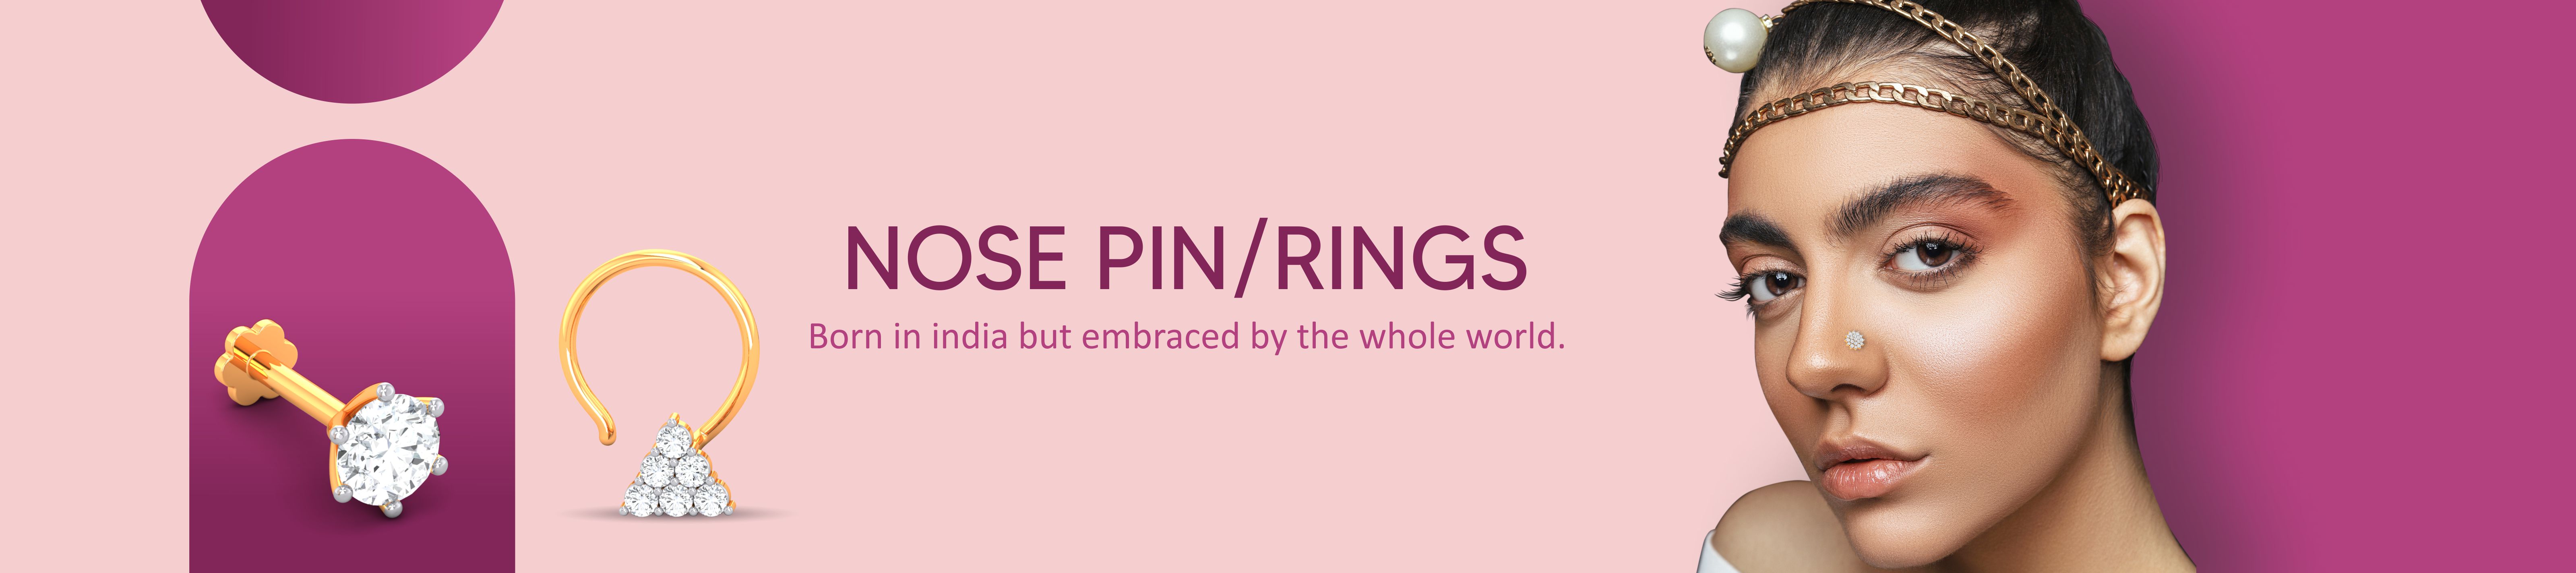 NOSE PINS/RINGS